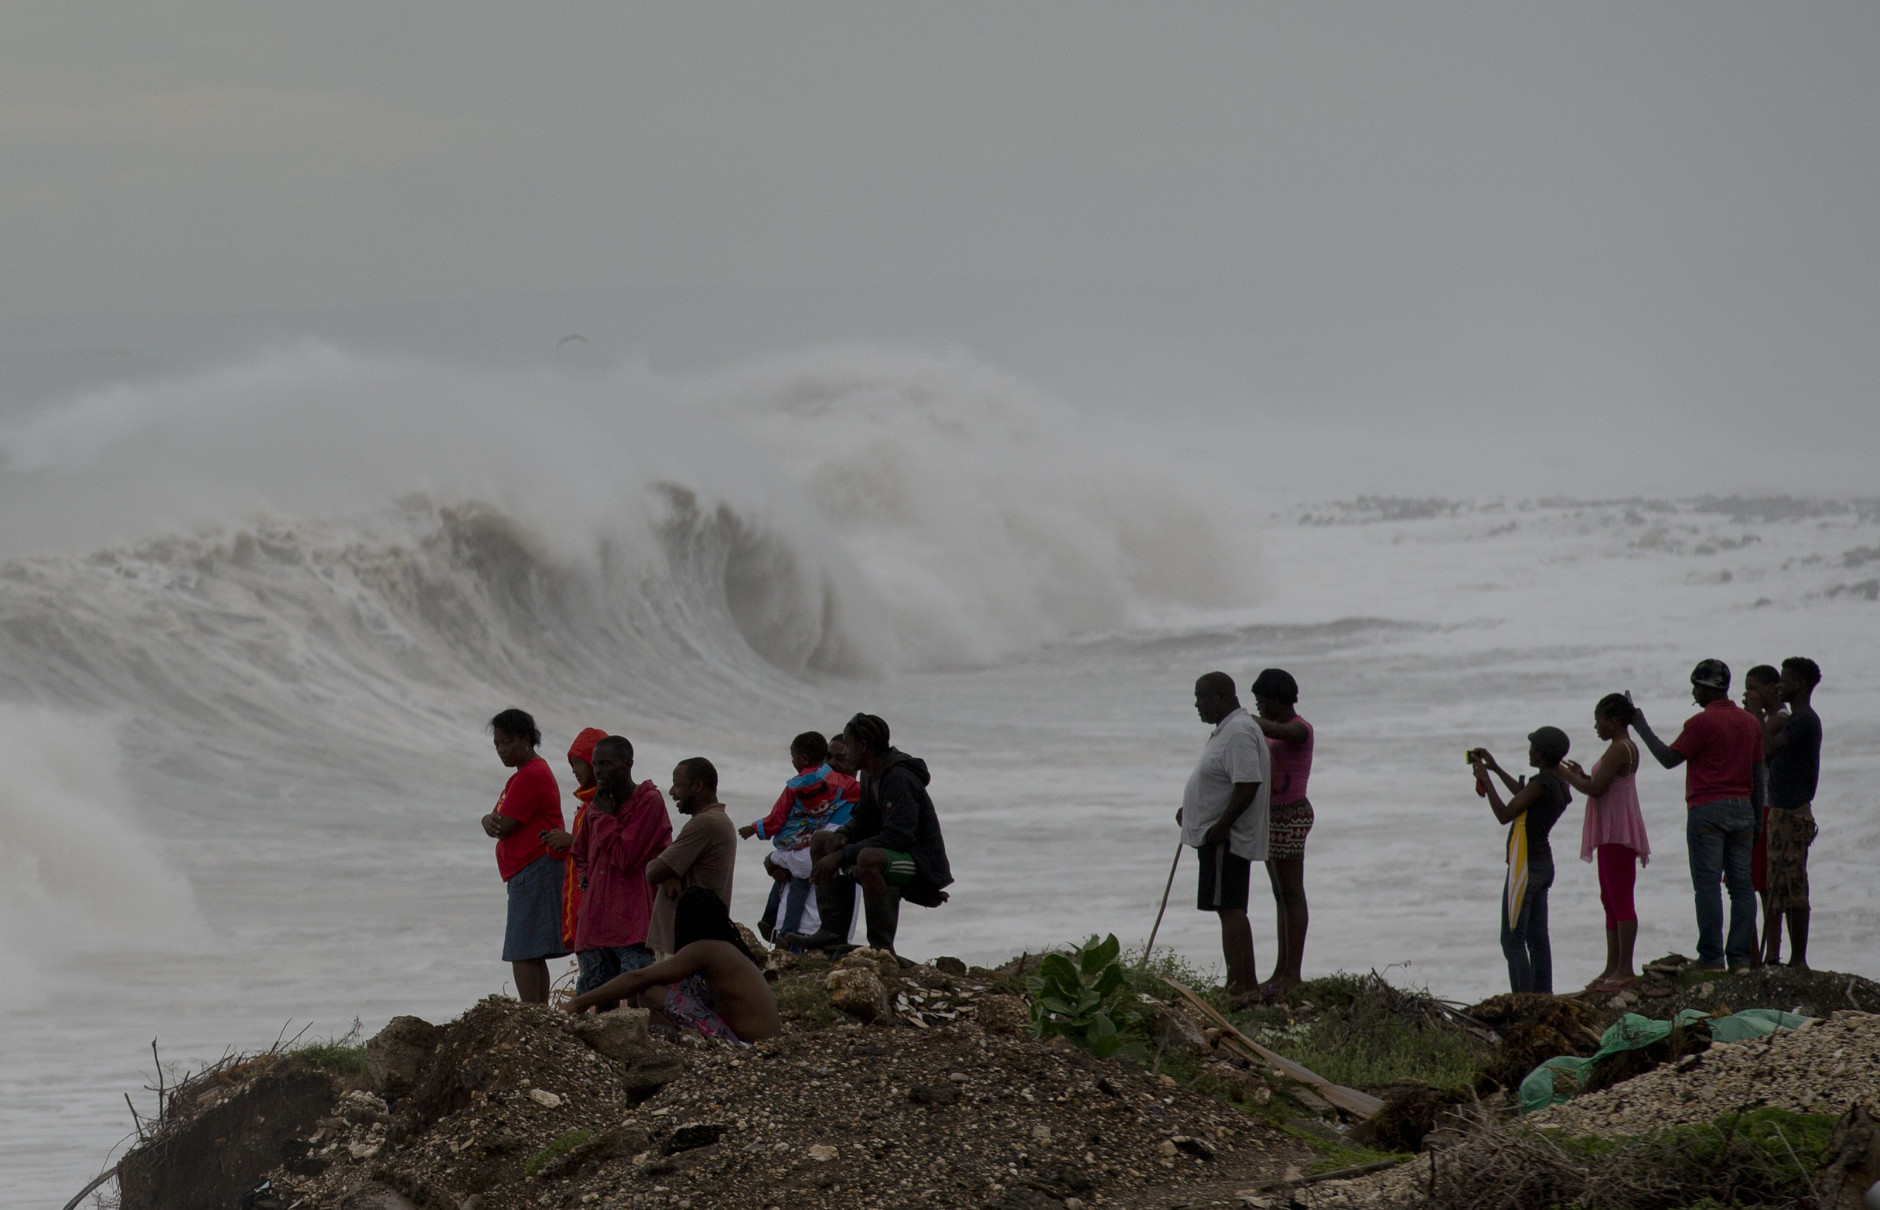 People stand on the coast watching the surf produced by Hurricane Matthew, on the outskirts of Kingston, Jamaica, Monday, Oct. 3, 2016. A hurricane warning is in effect for Jamaica, Haiti, and the Cuban provinces of Guantanamo, Santiago de Cuba, Holguin, Granma and Las Tunas - as well as the southeastern Bahamas. (AP Photo/Eduardo Verdugo)